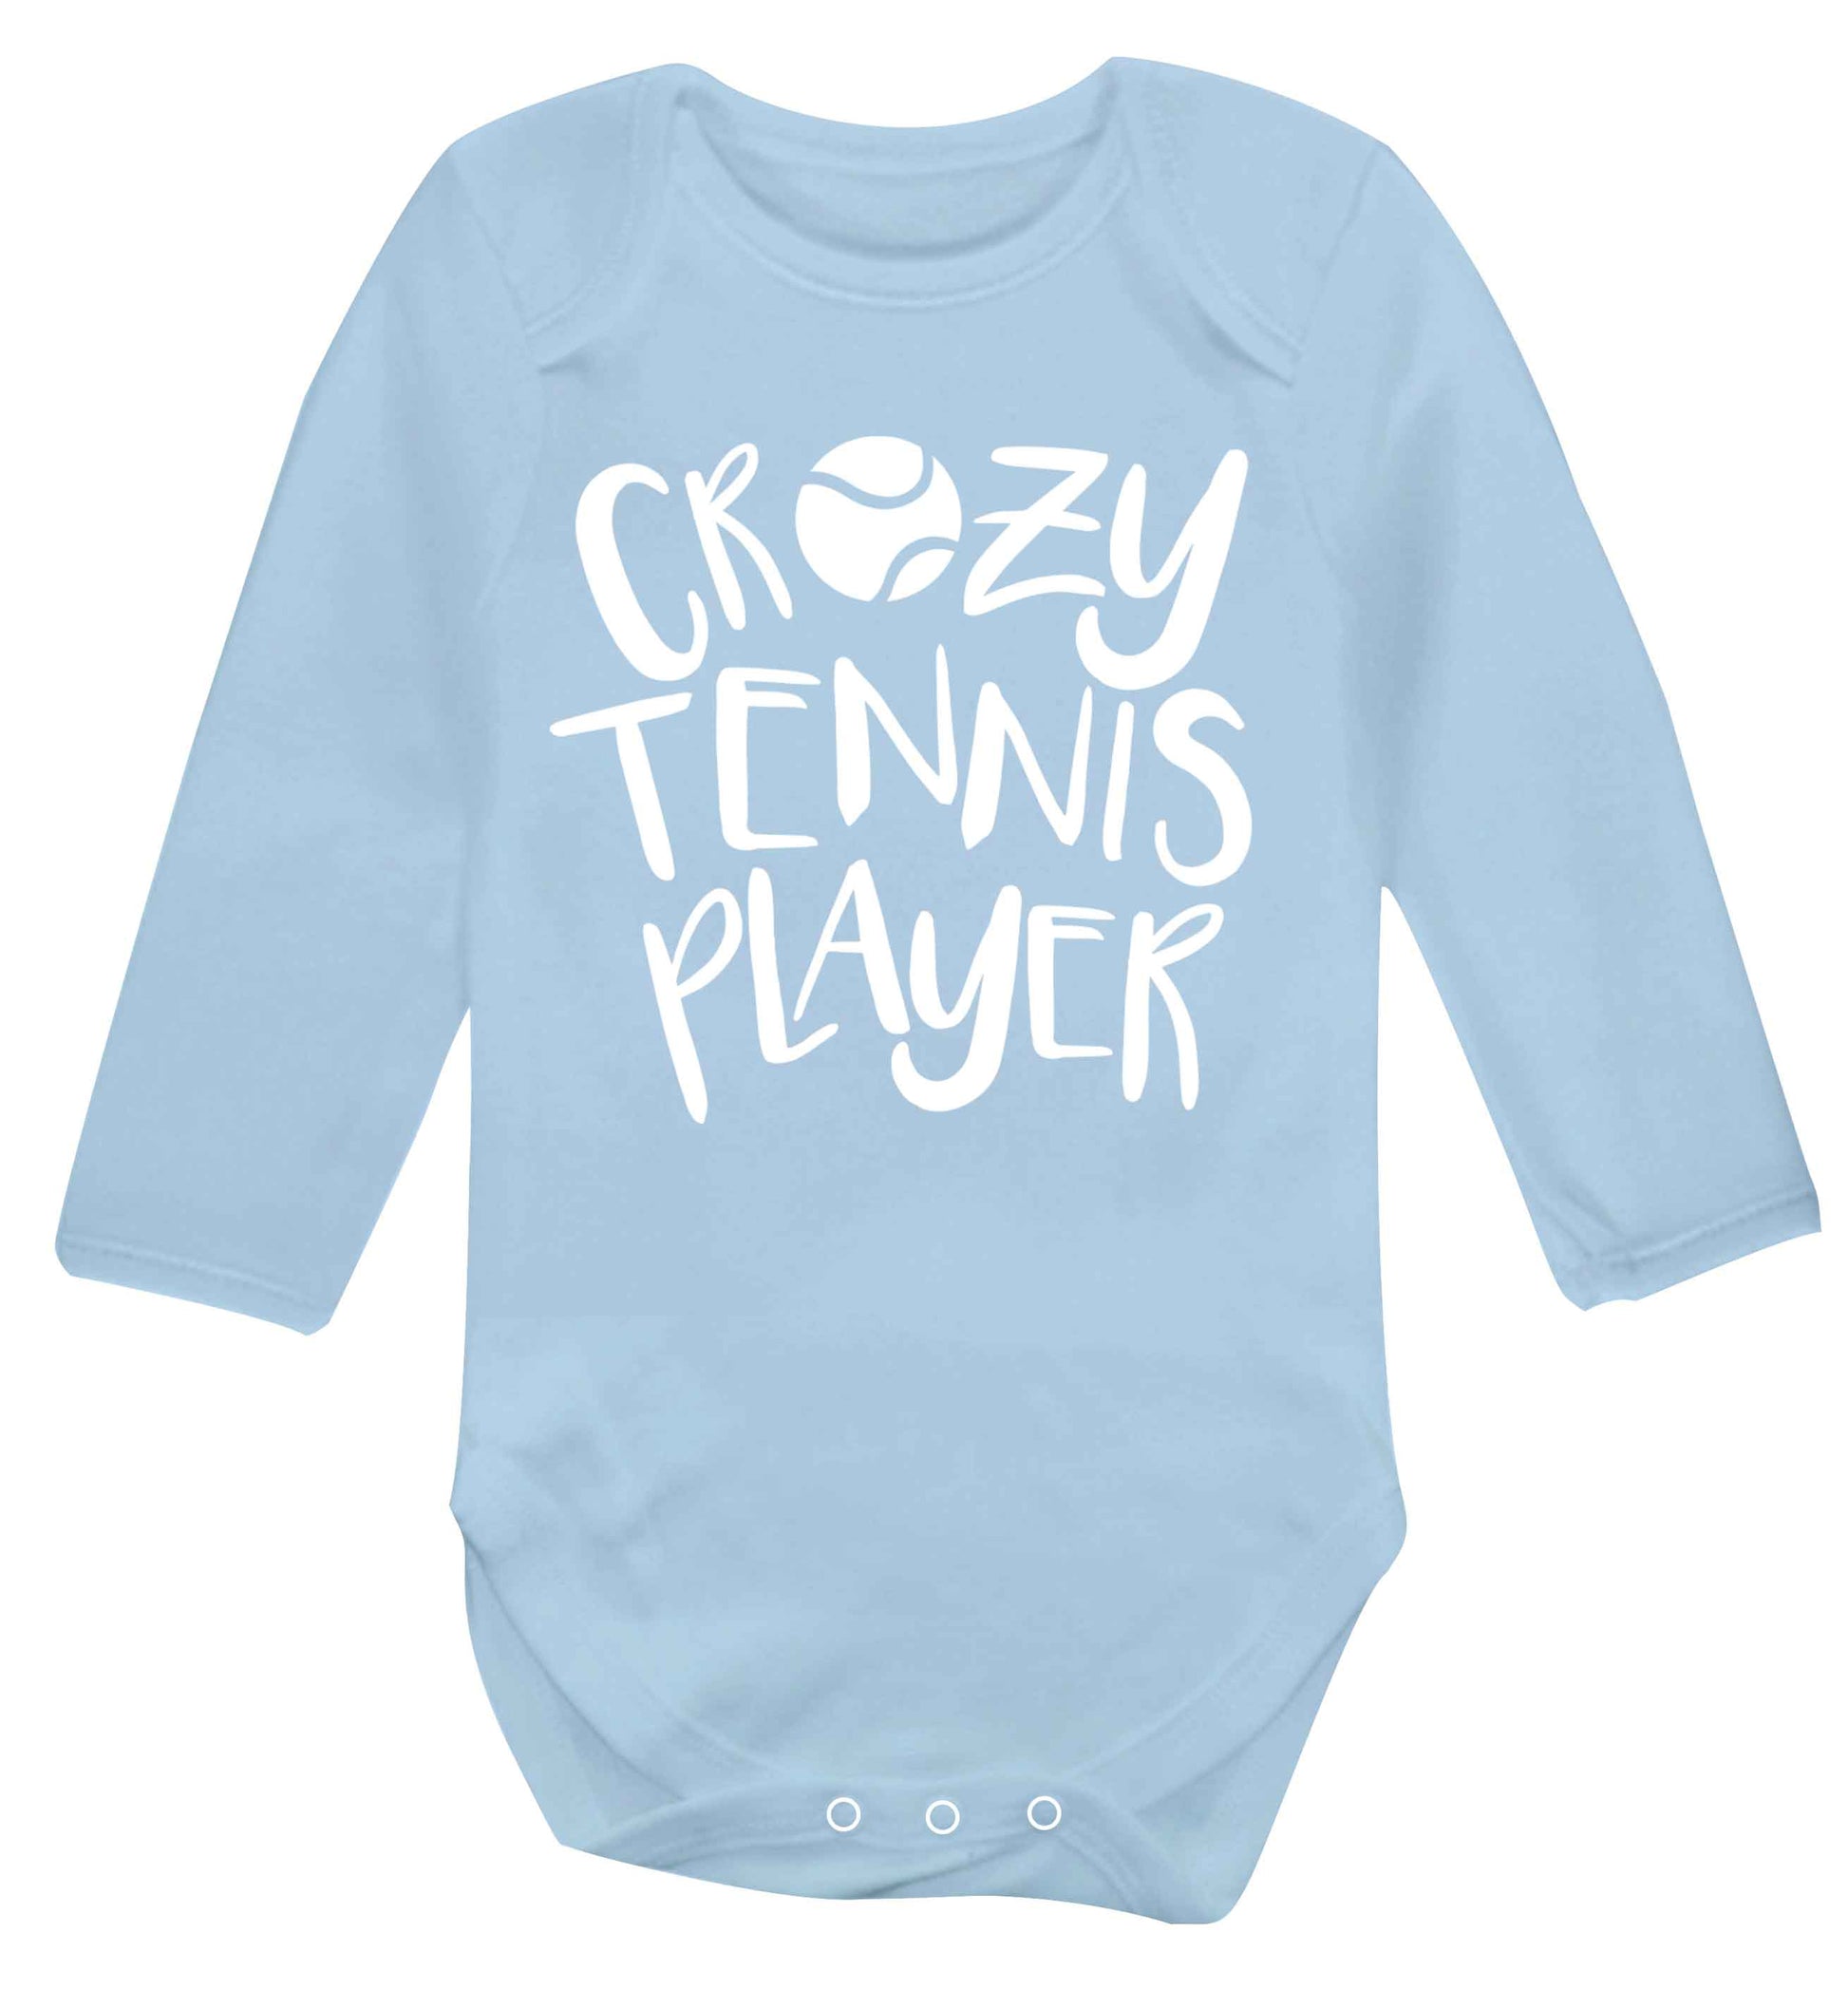 Crazy tennis player Baby Vest long sleeved pale blue 6-12 months